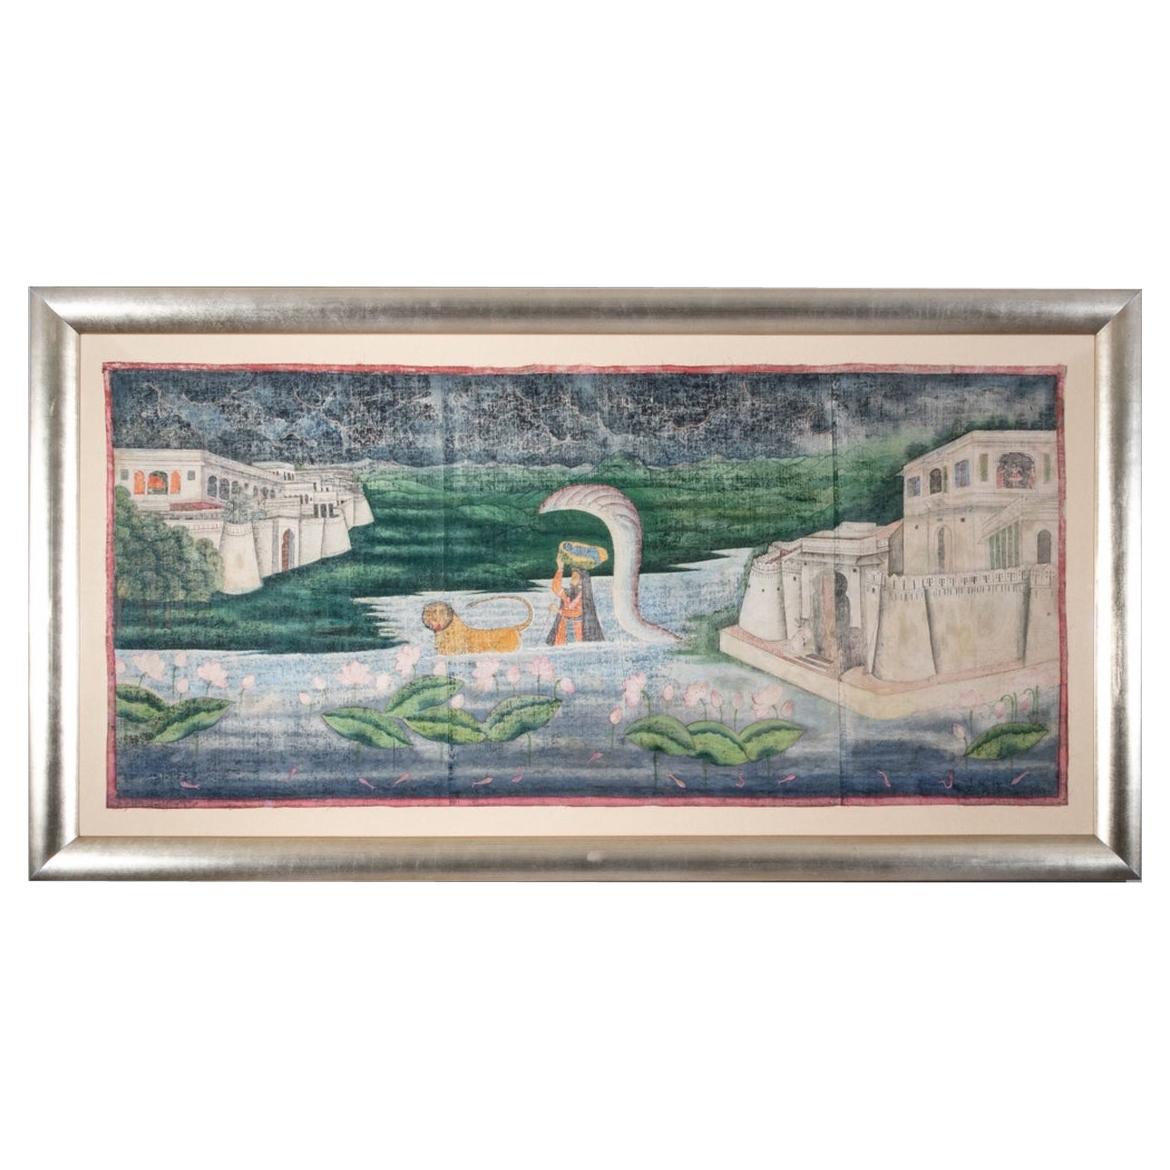 Large Framed Textile Depiction of the Baby Krishna Escaping King Kansa